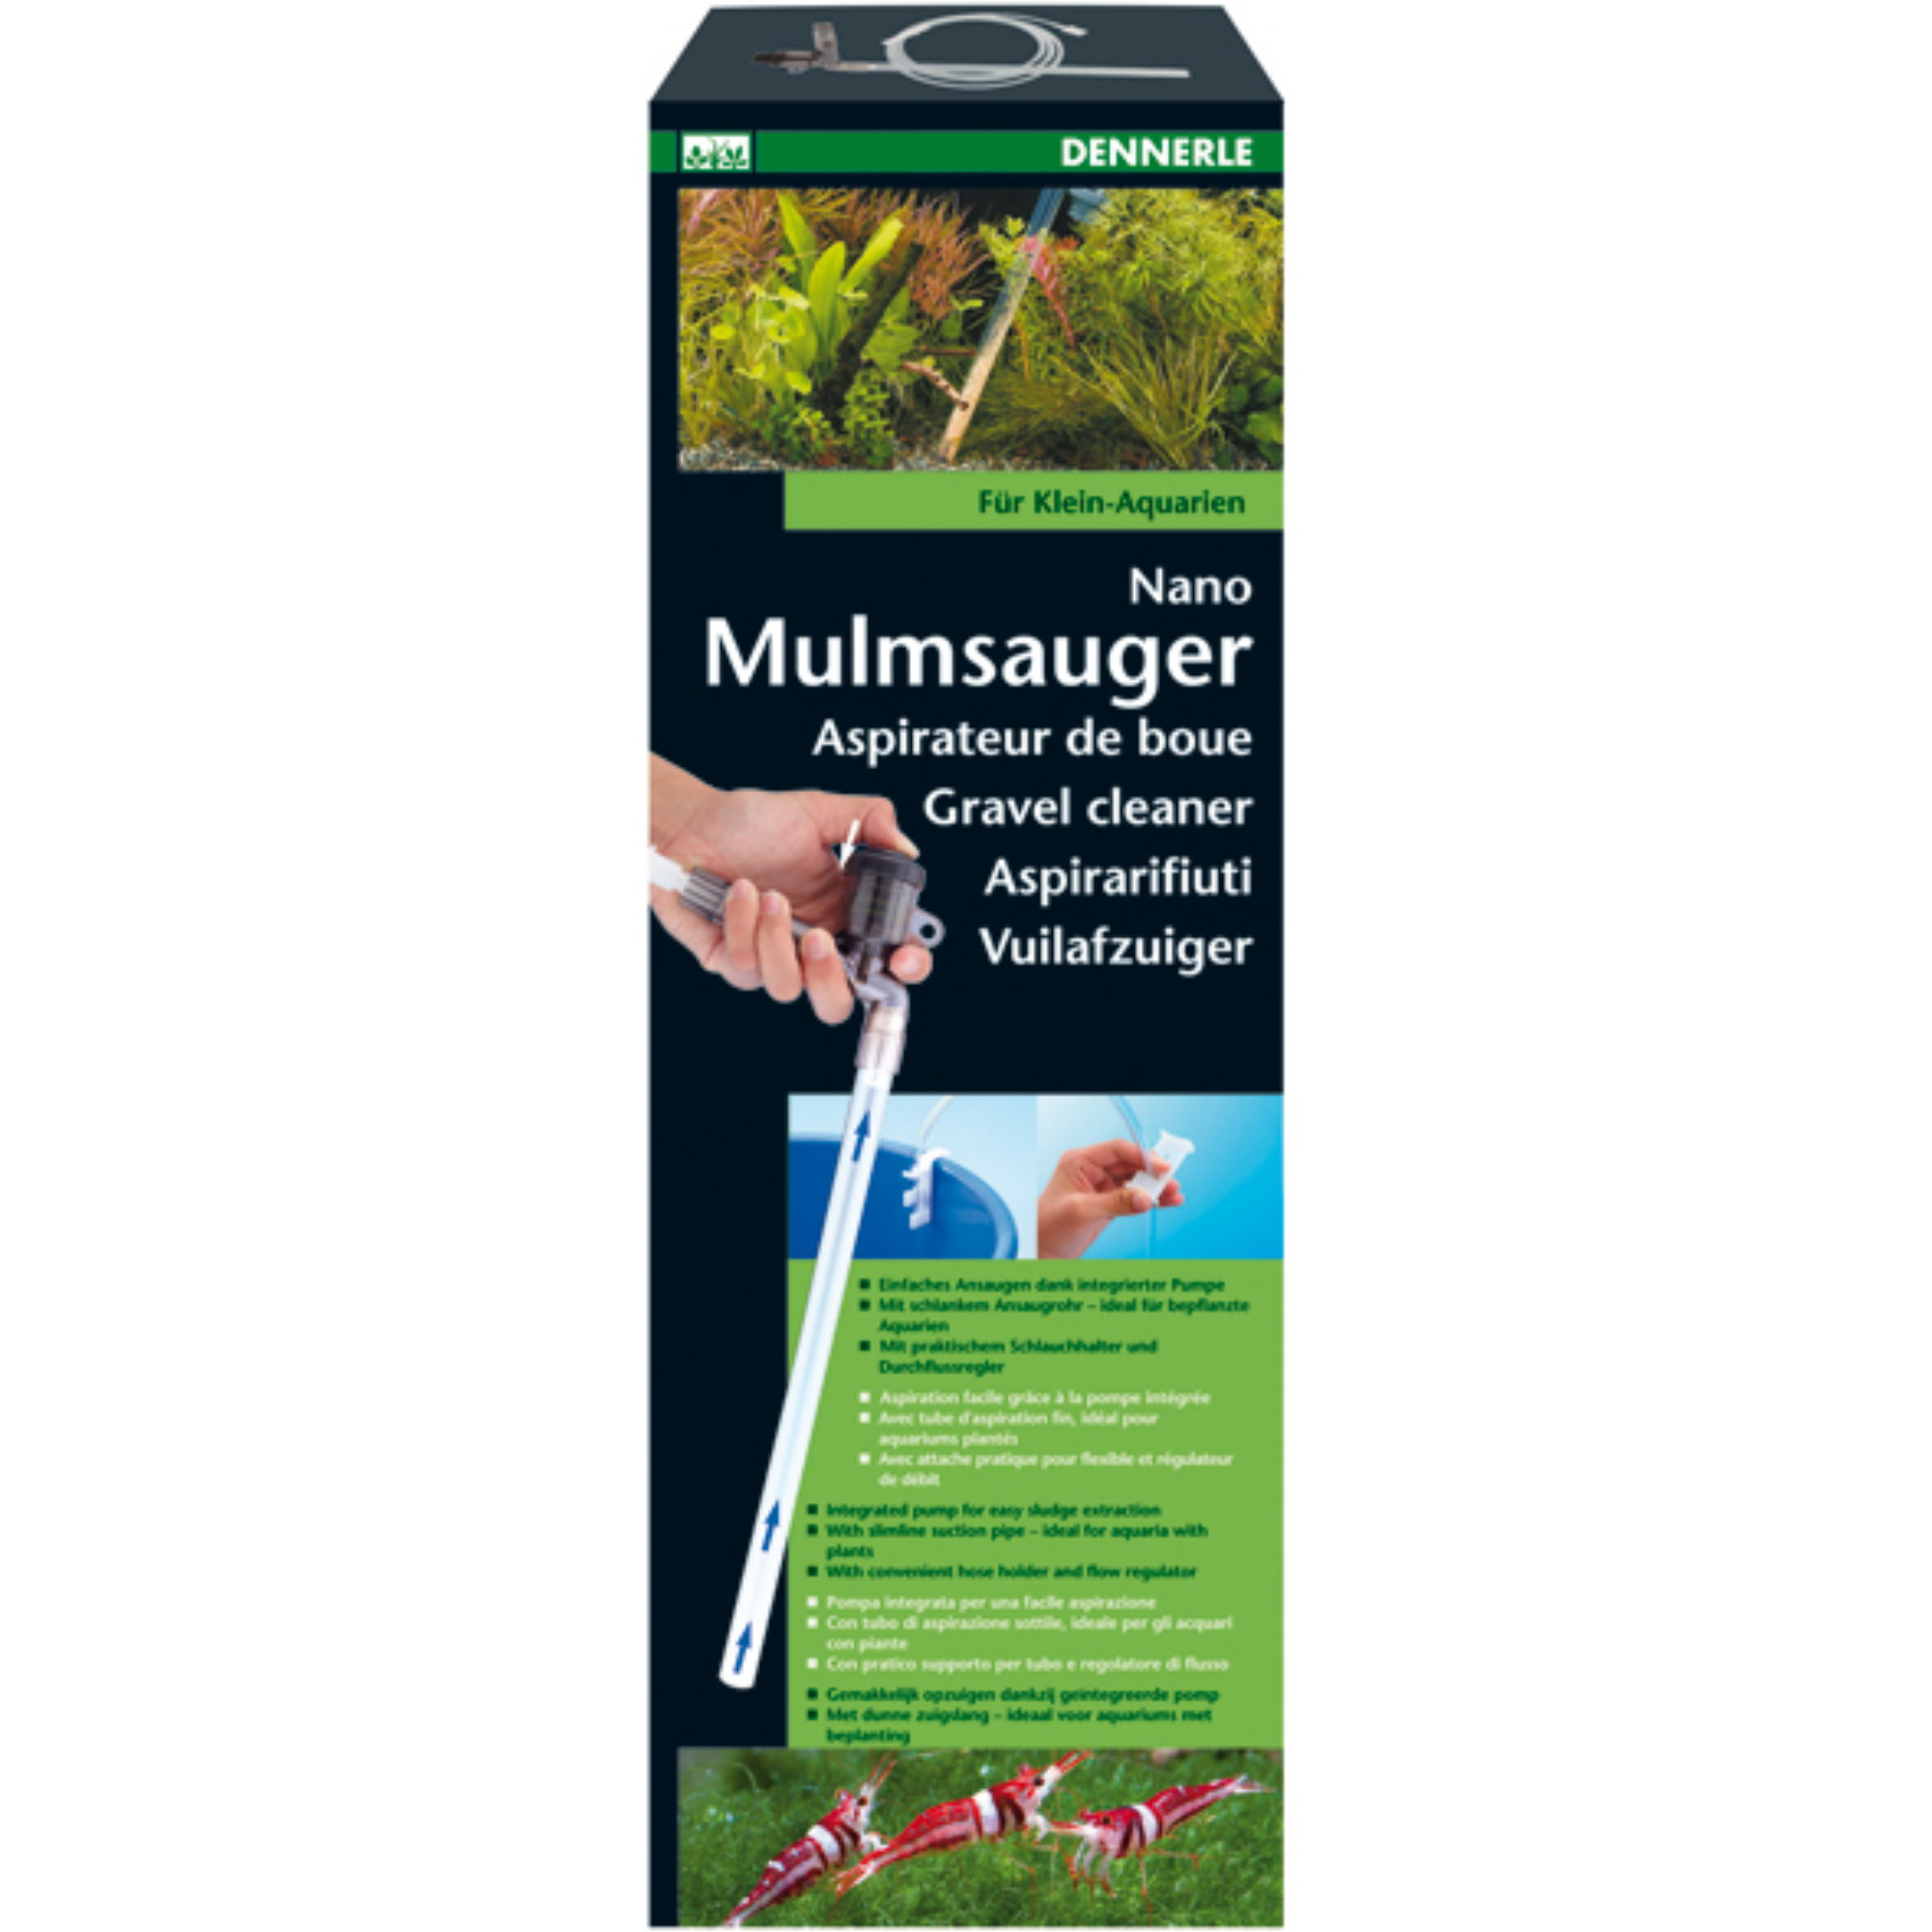 Mulmsauger "Nano" + product picture